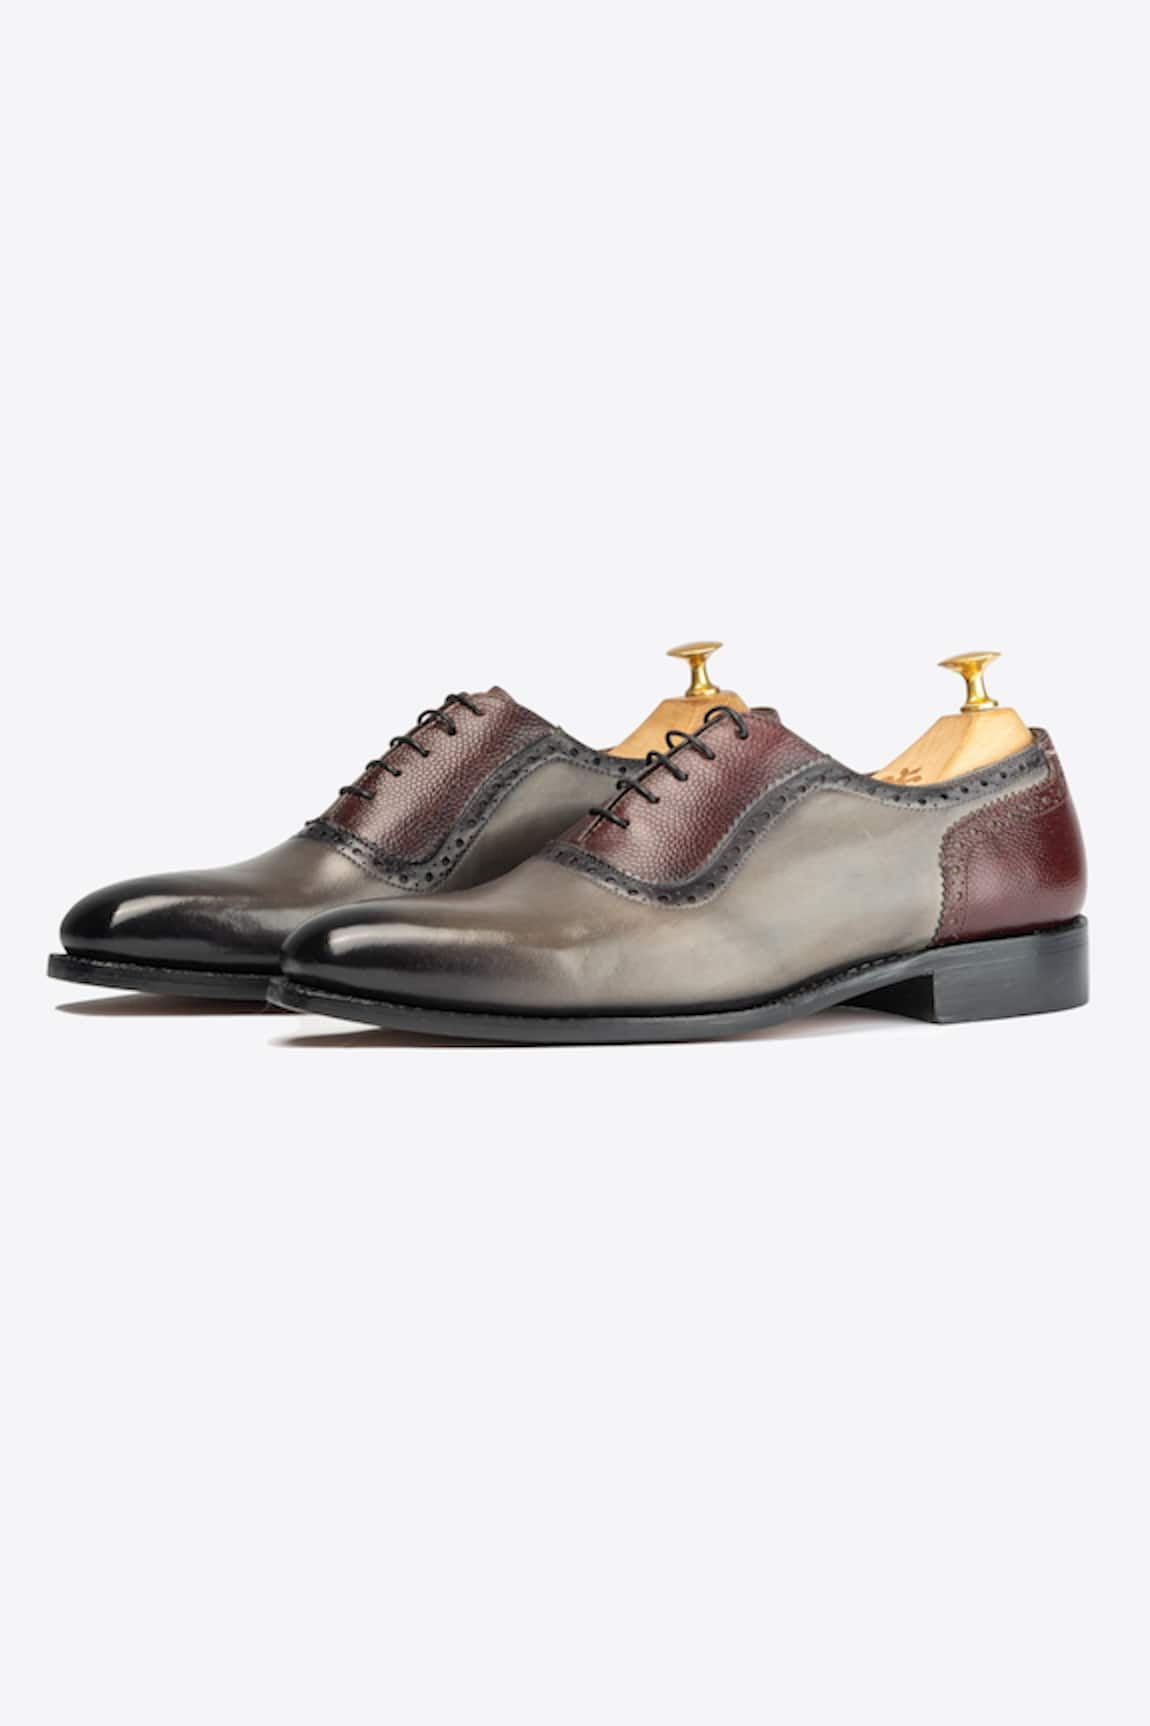 Whitemuds Peck-Ham Oxford Shoes